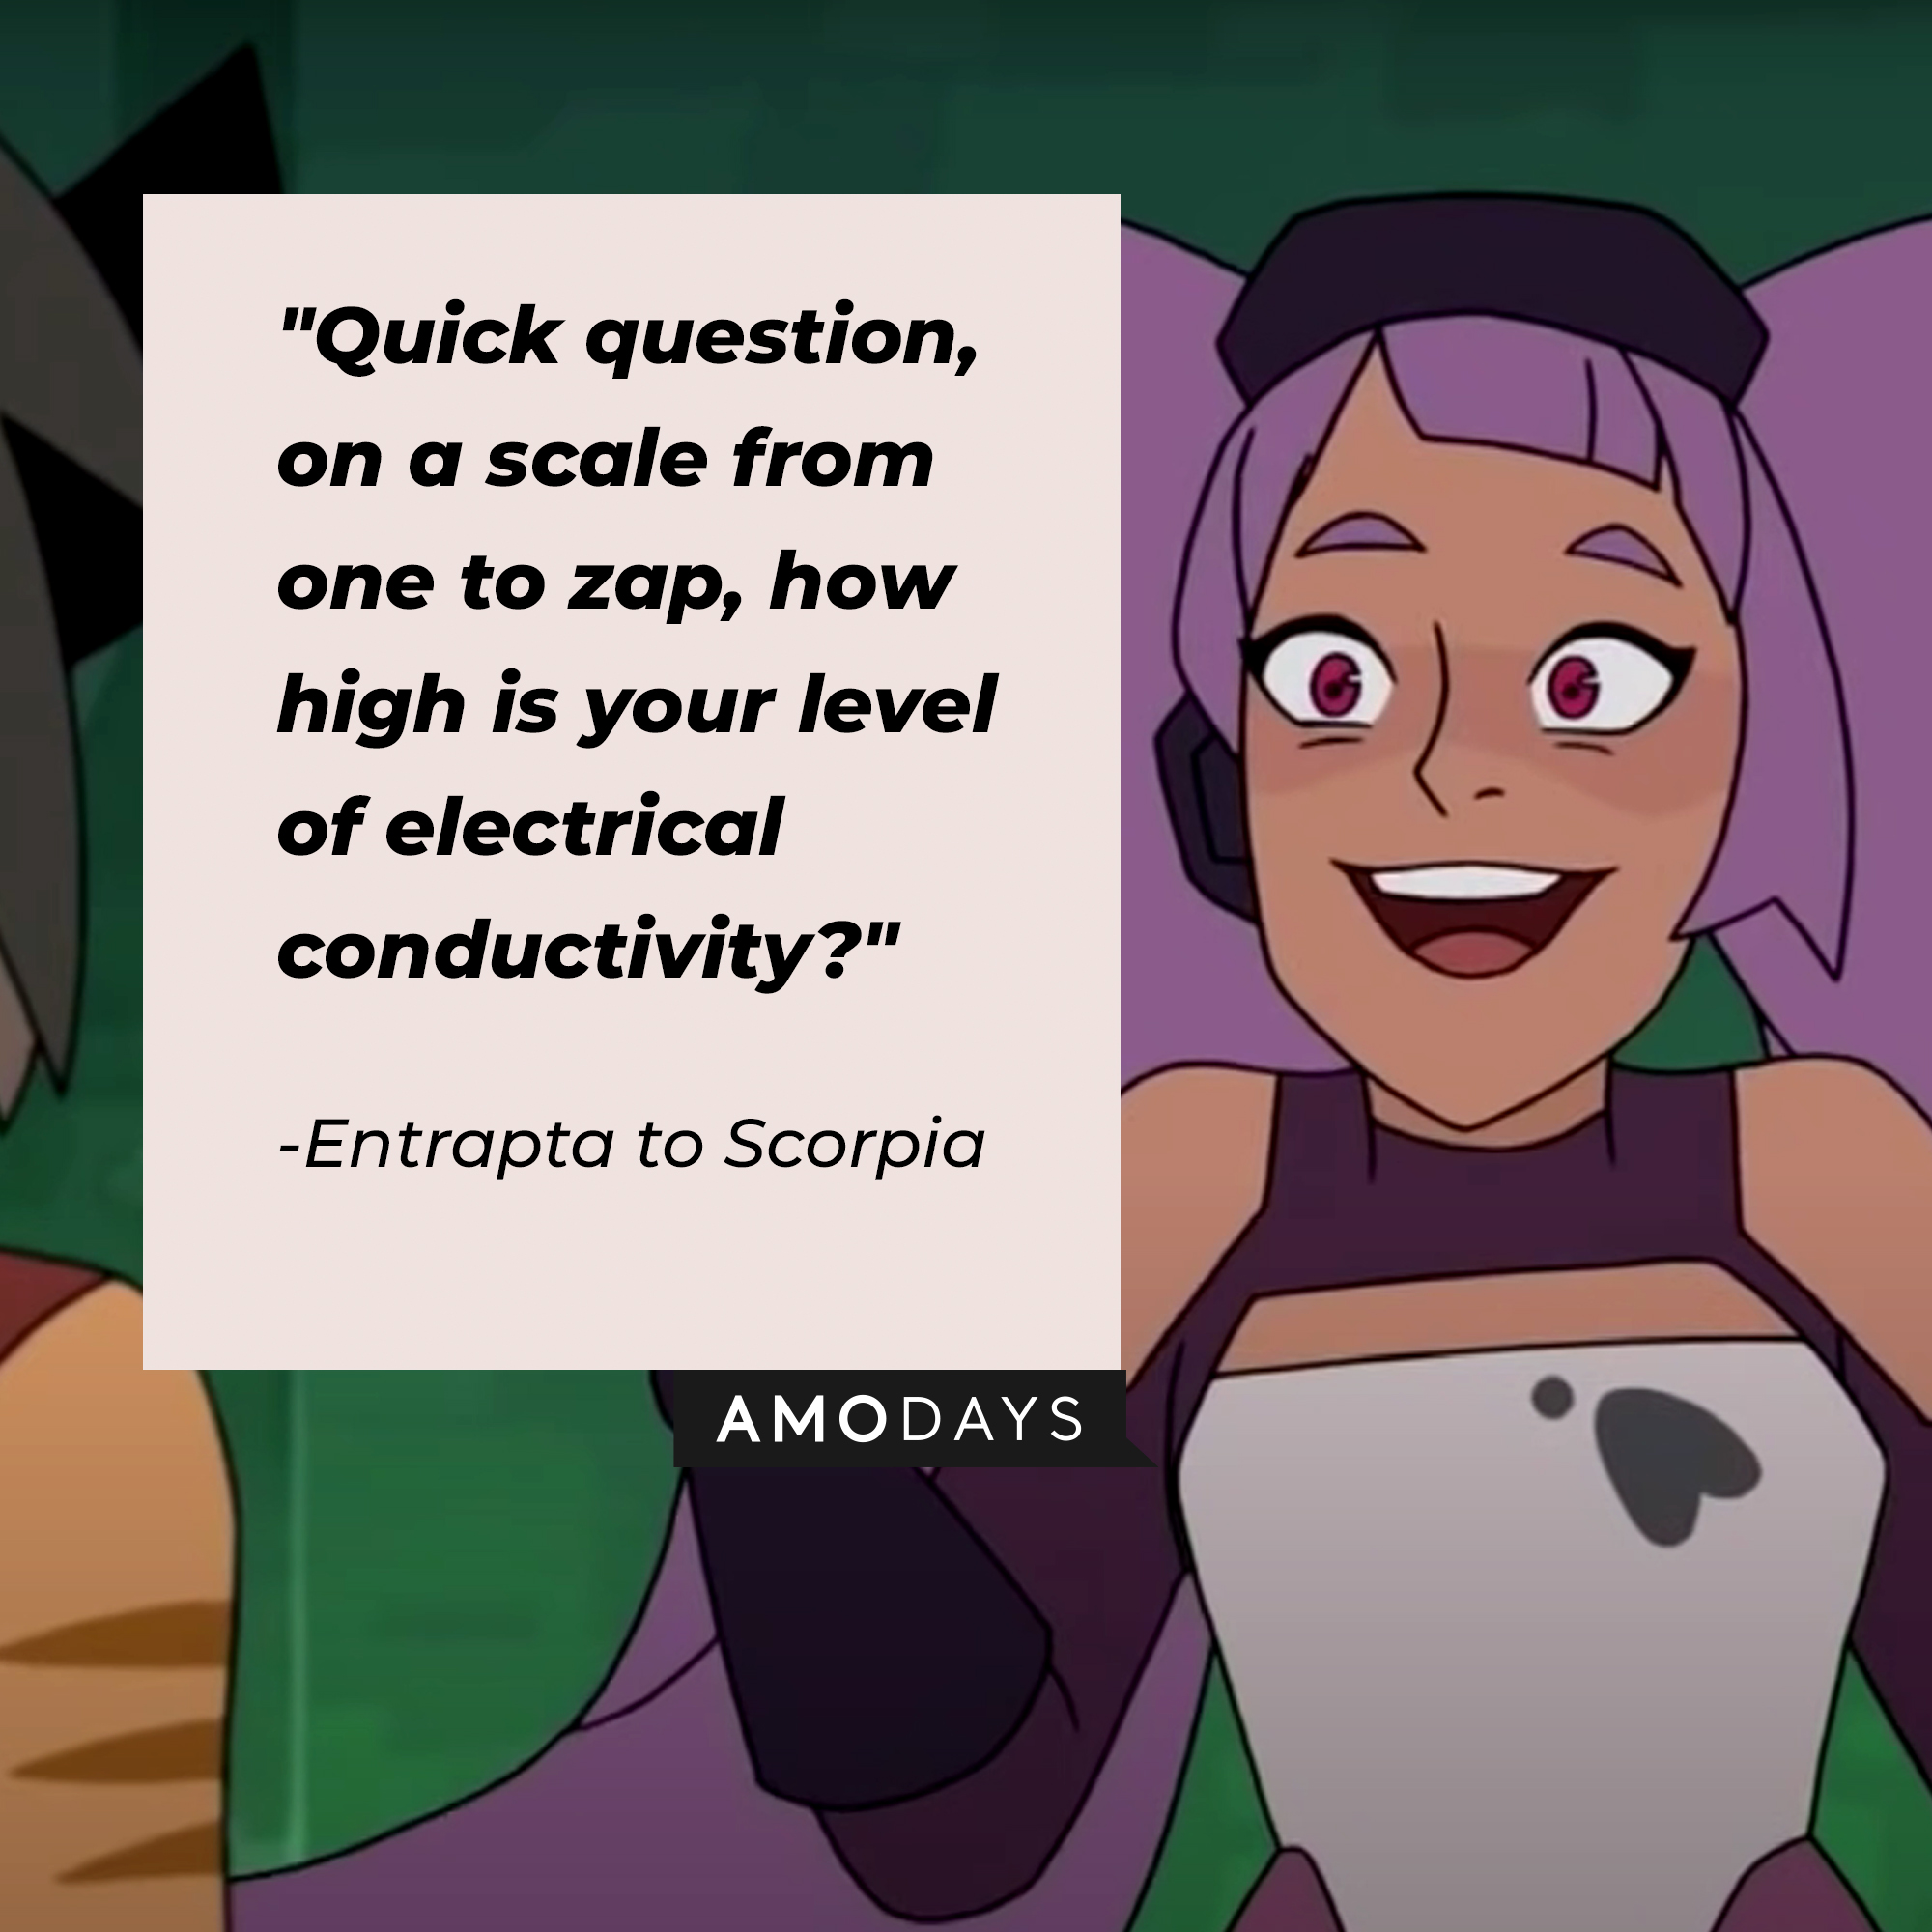 A quote from Entrapta to Scorpia: "Quick question, on a scale from one to zap, how high is your level of electrical conductivity?" | Source: youtube.com/netflixafterschool